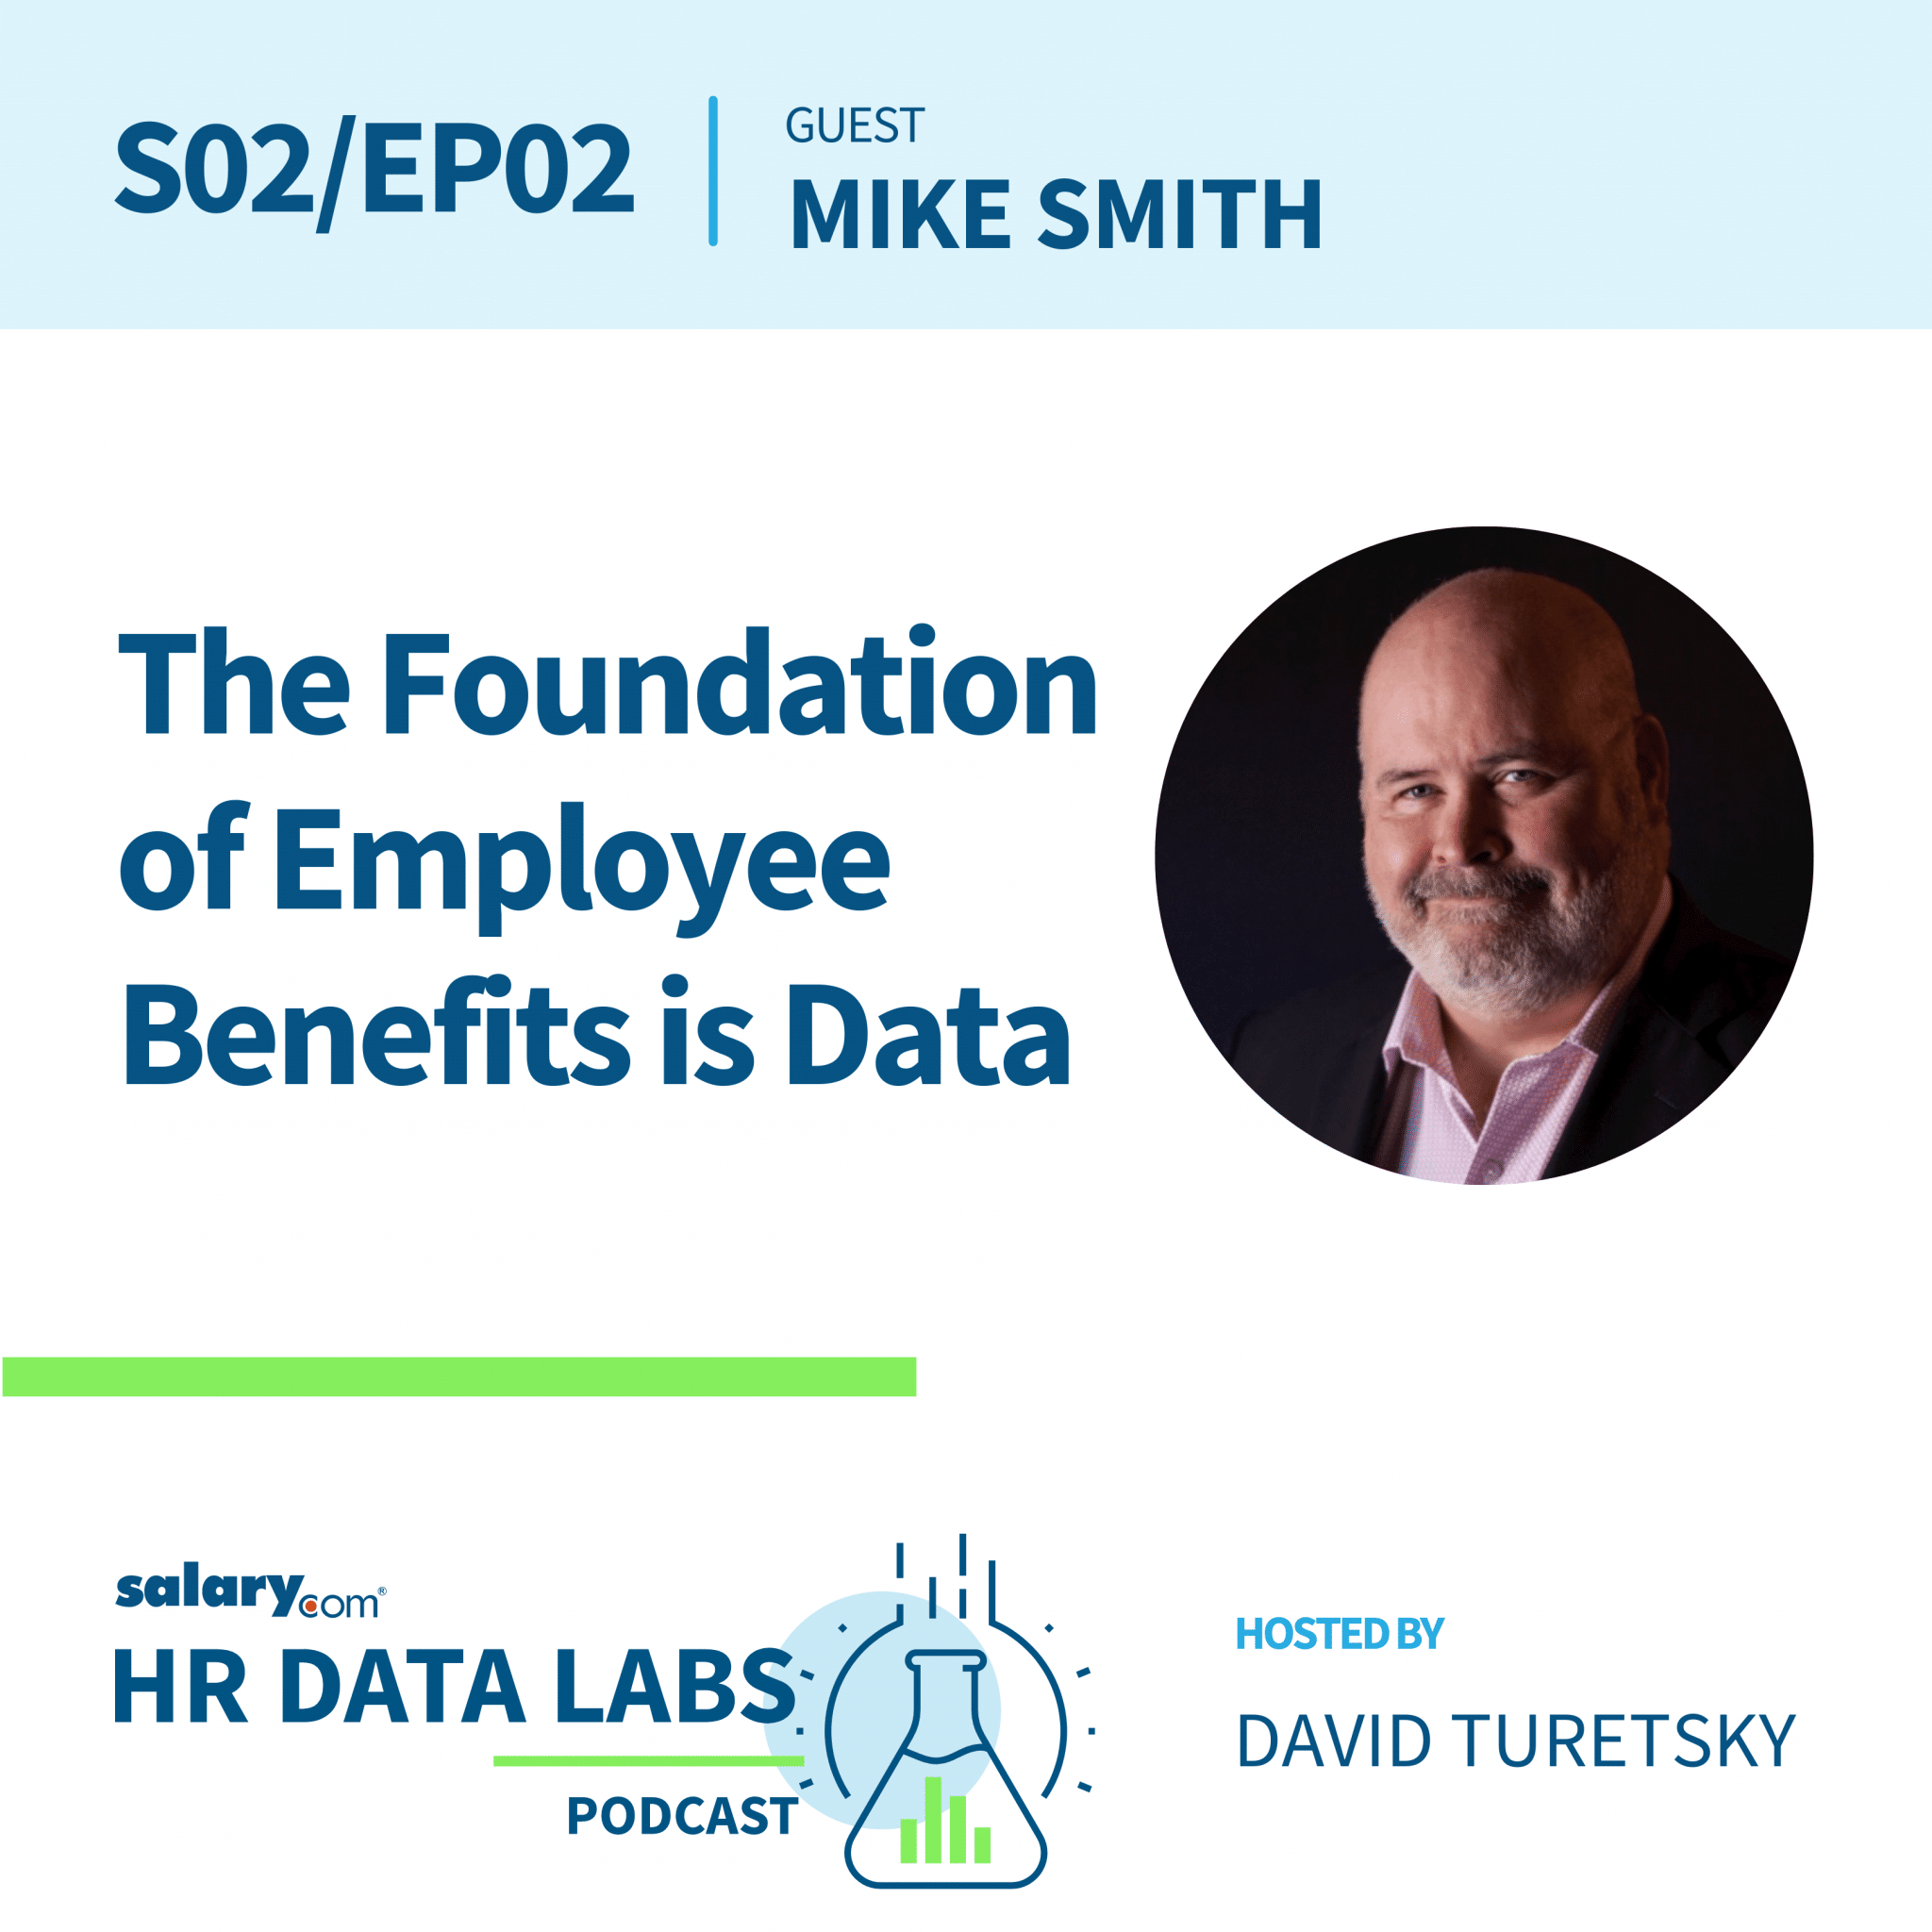 The Foundation of Employee Benefits is Data